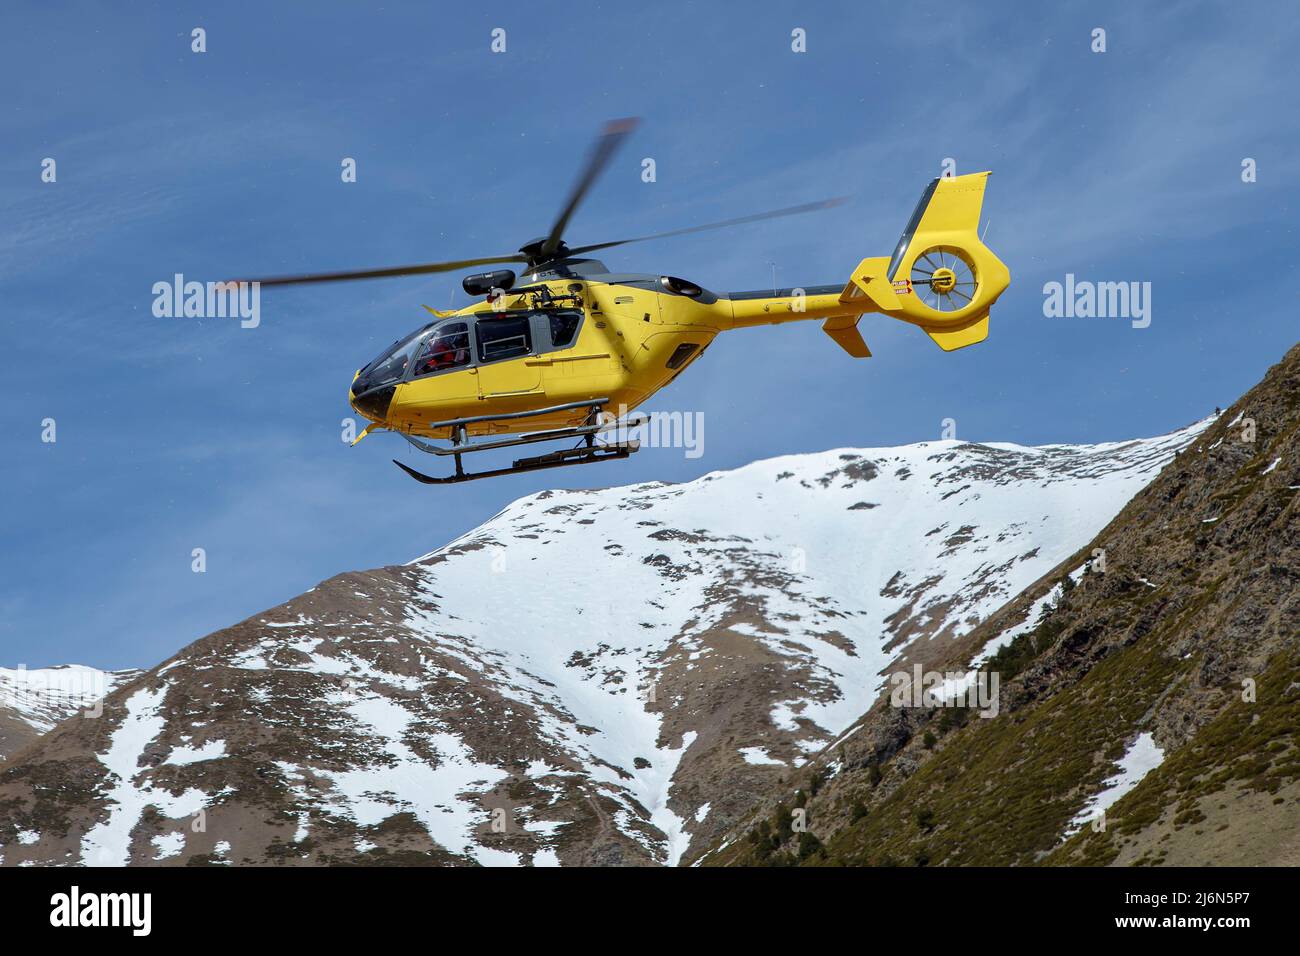 Helicopter Eurocopter EC135 now known as Airbus Helicopters H135 is a twin-engine civil helicopter manufactured by Airbus Helicopters. for police, Stock Photo